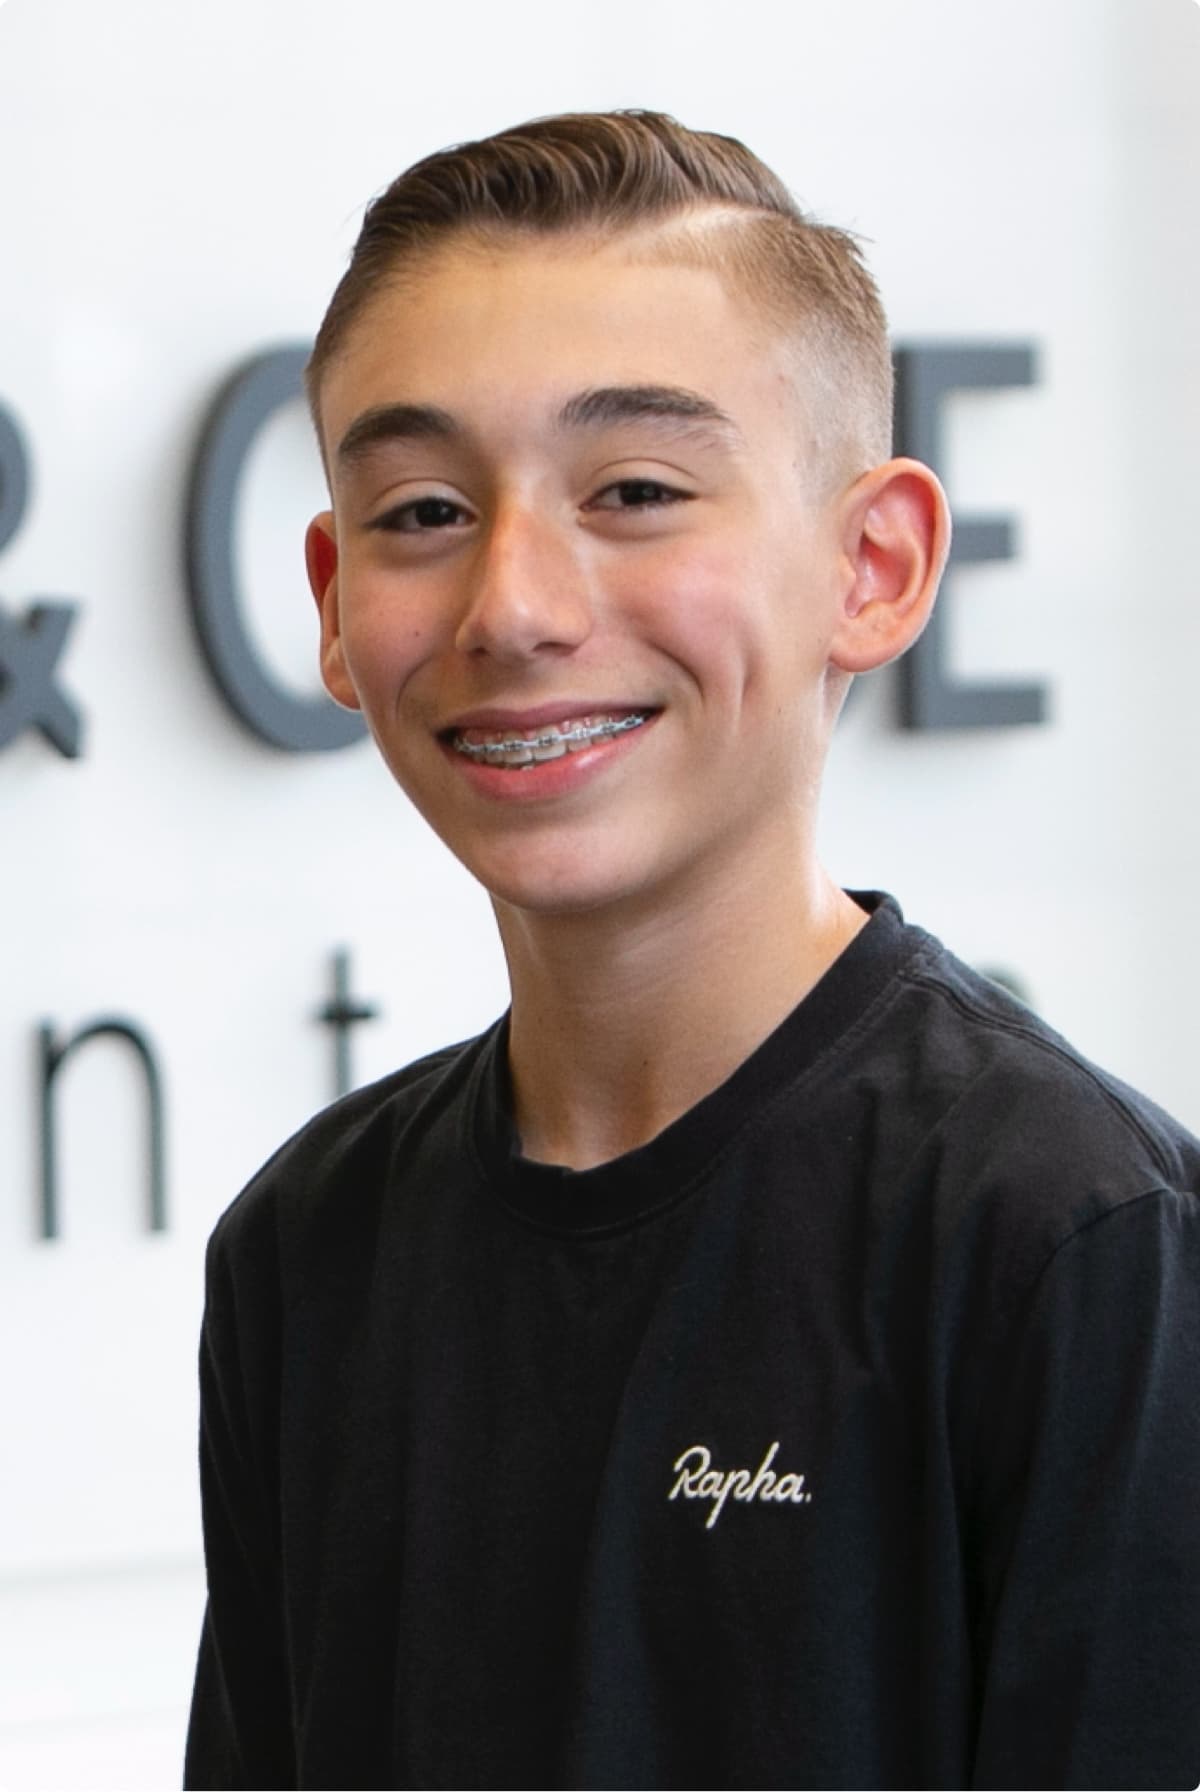 teen smiling with braces